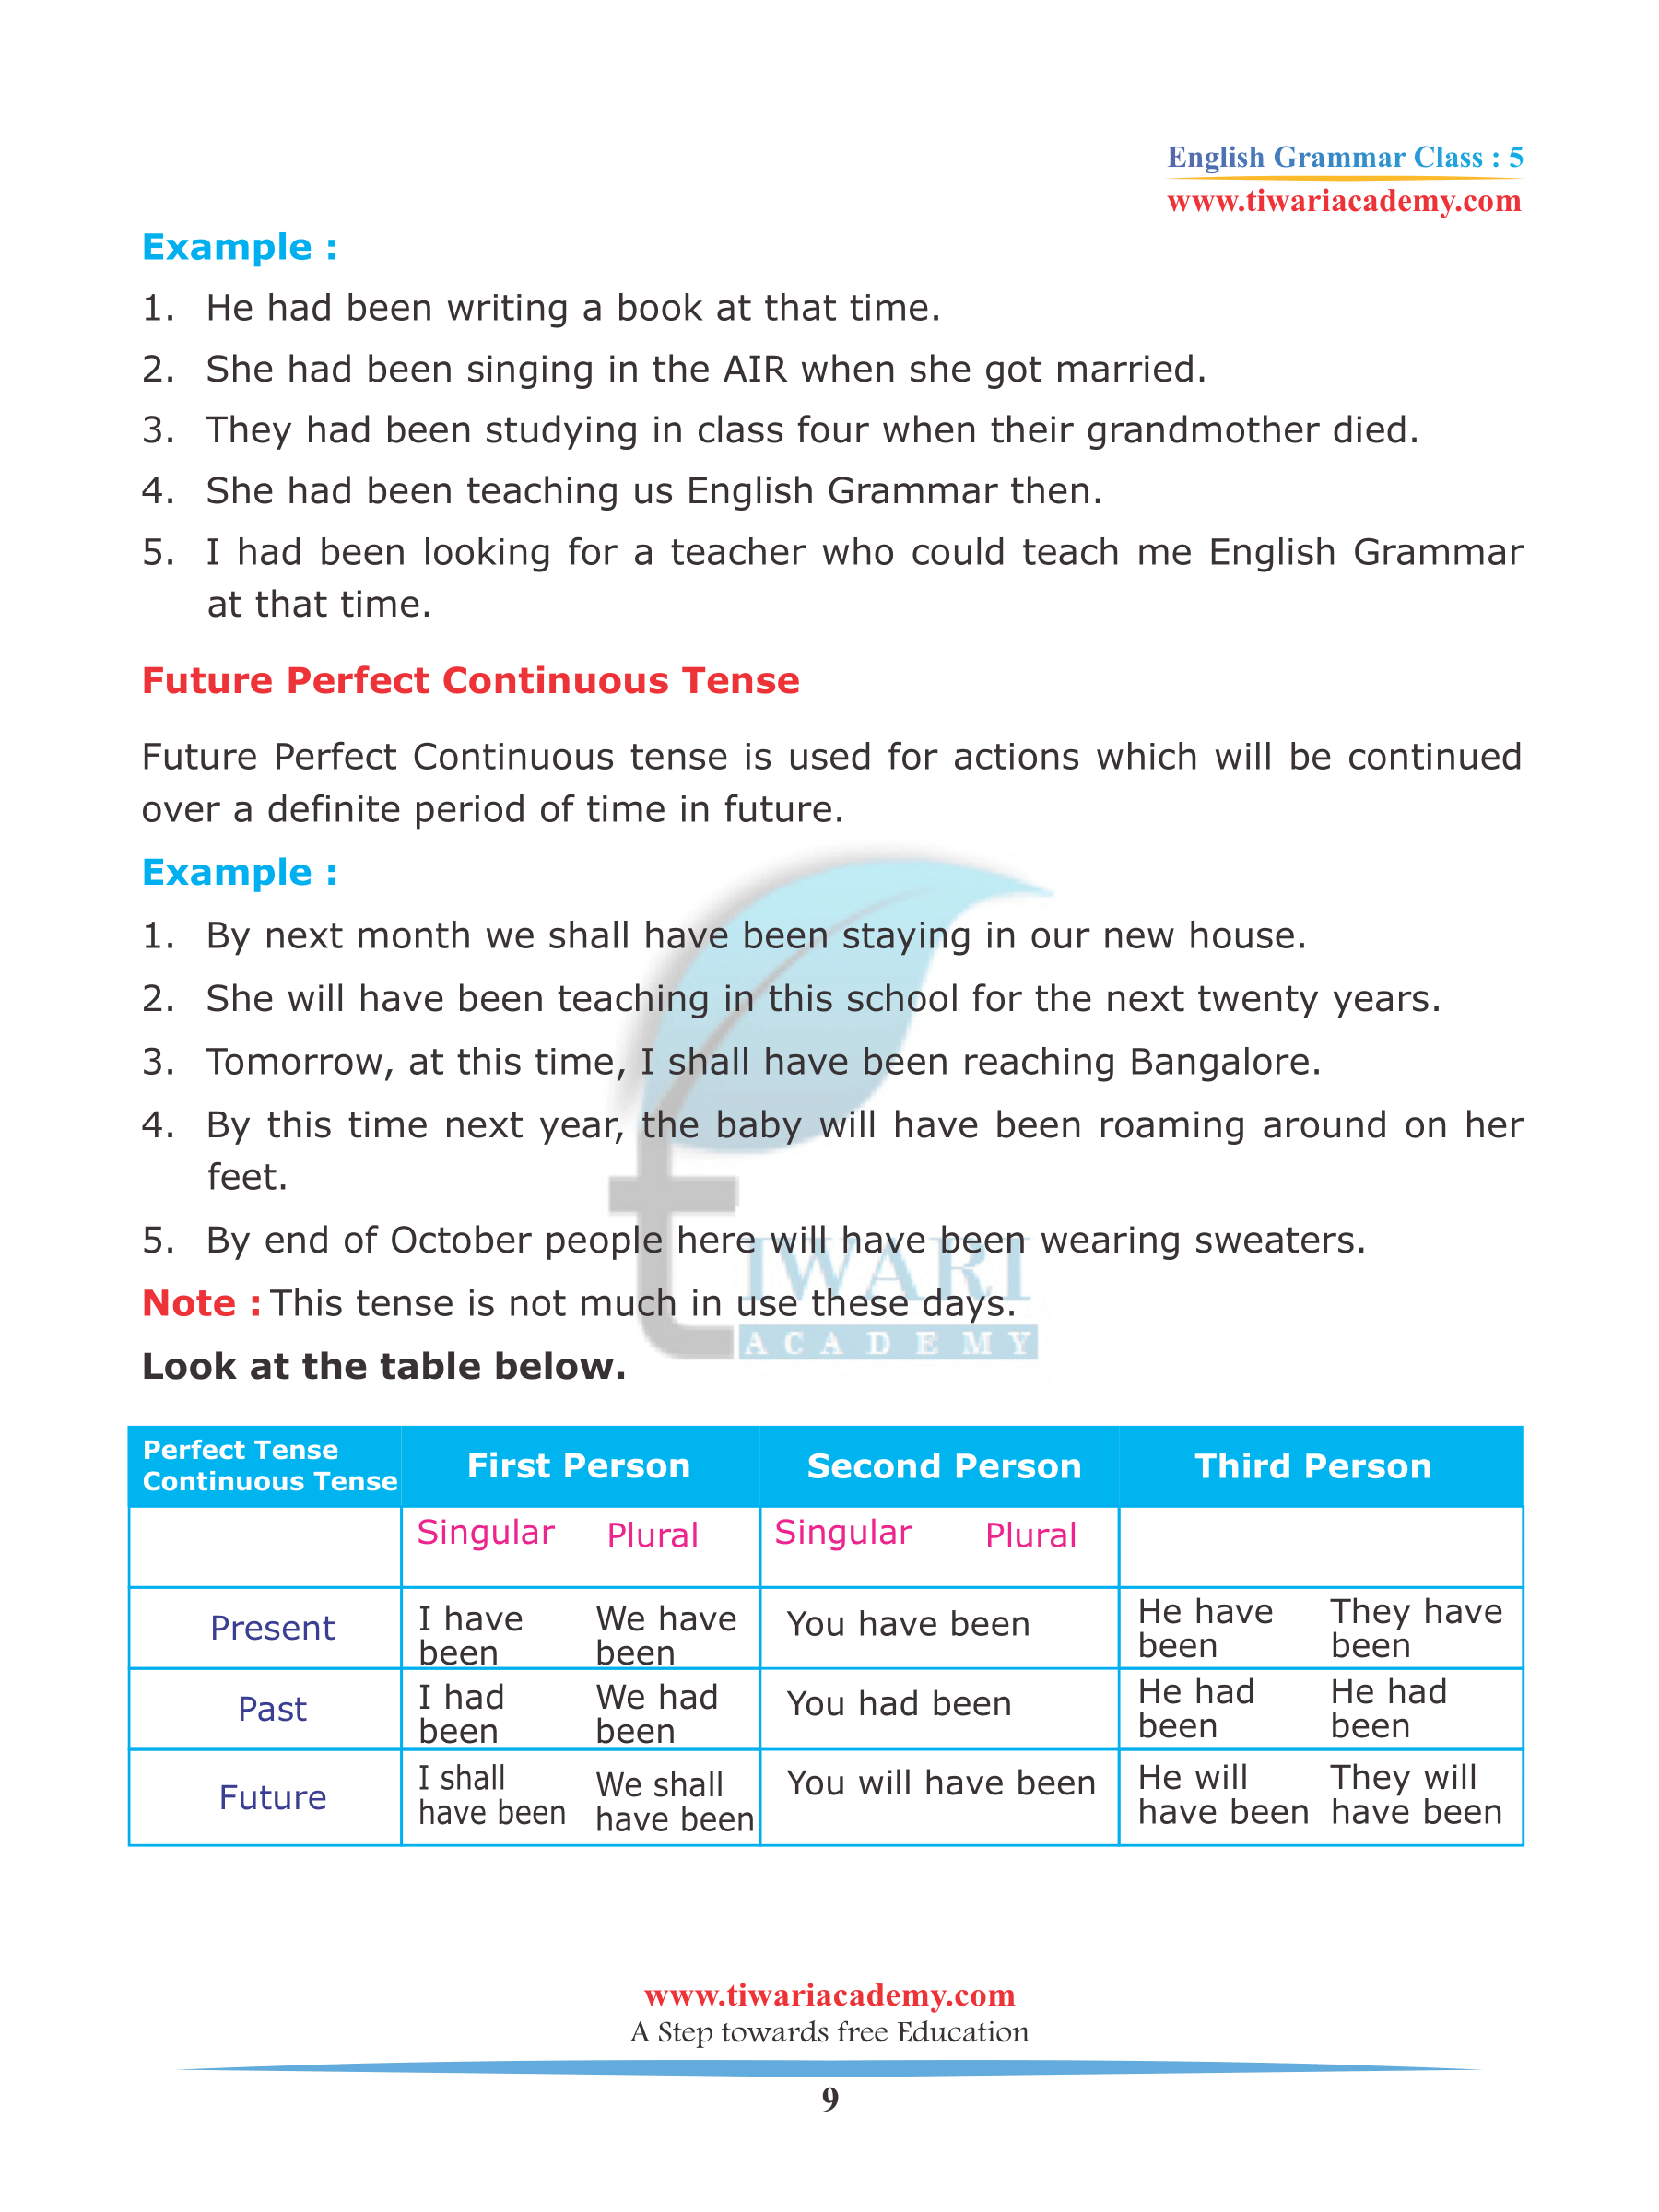 Class 5 English Grammar Chapter 6 Verb and Tense for 2022-2023